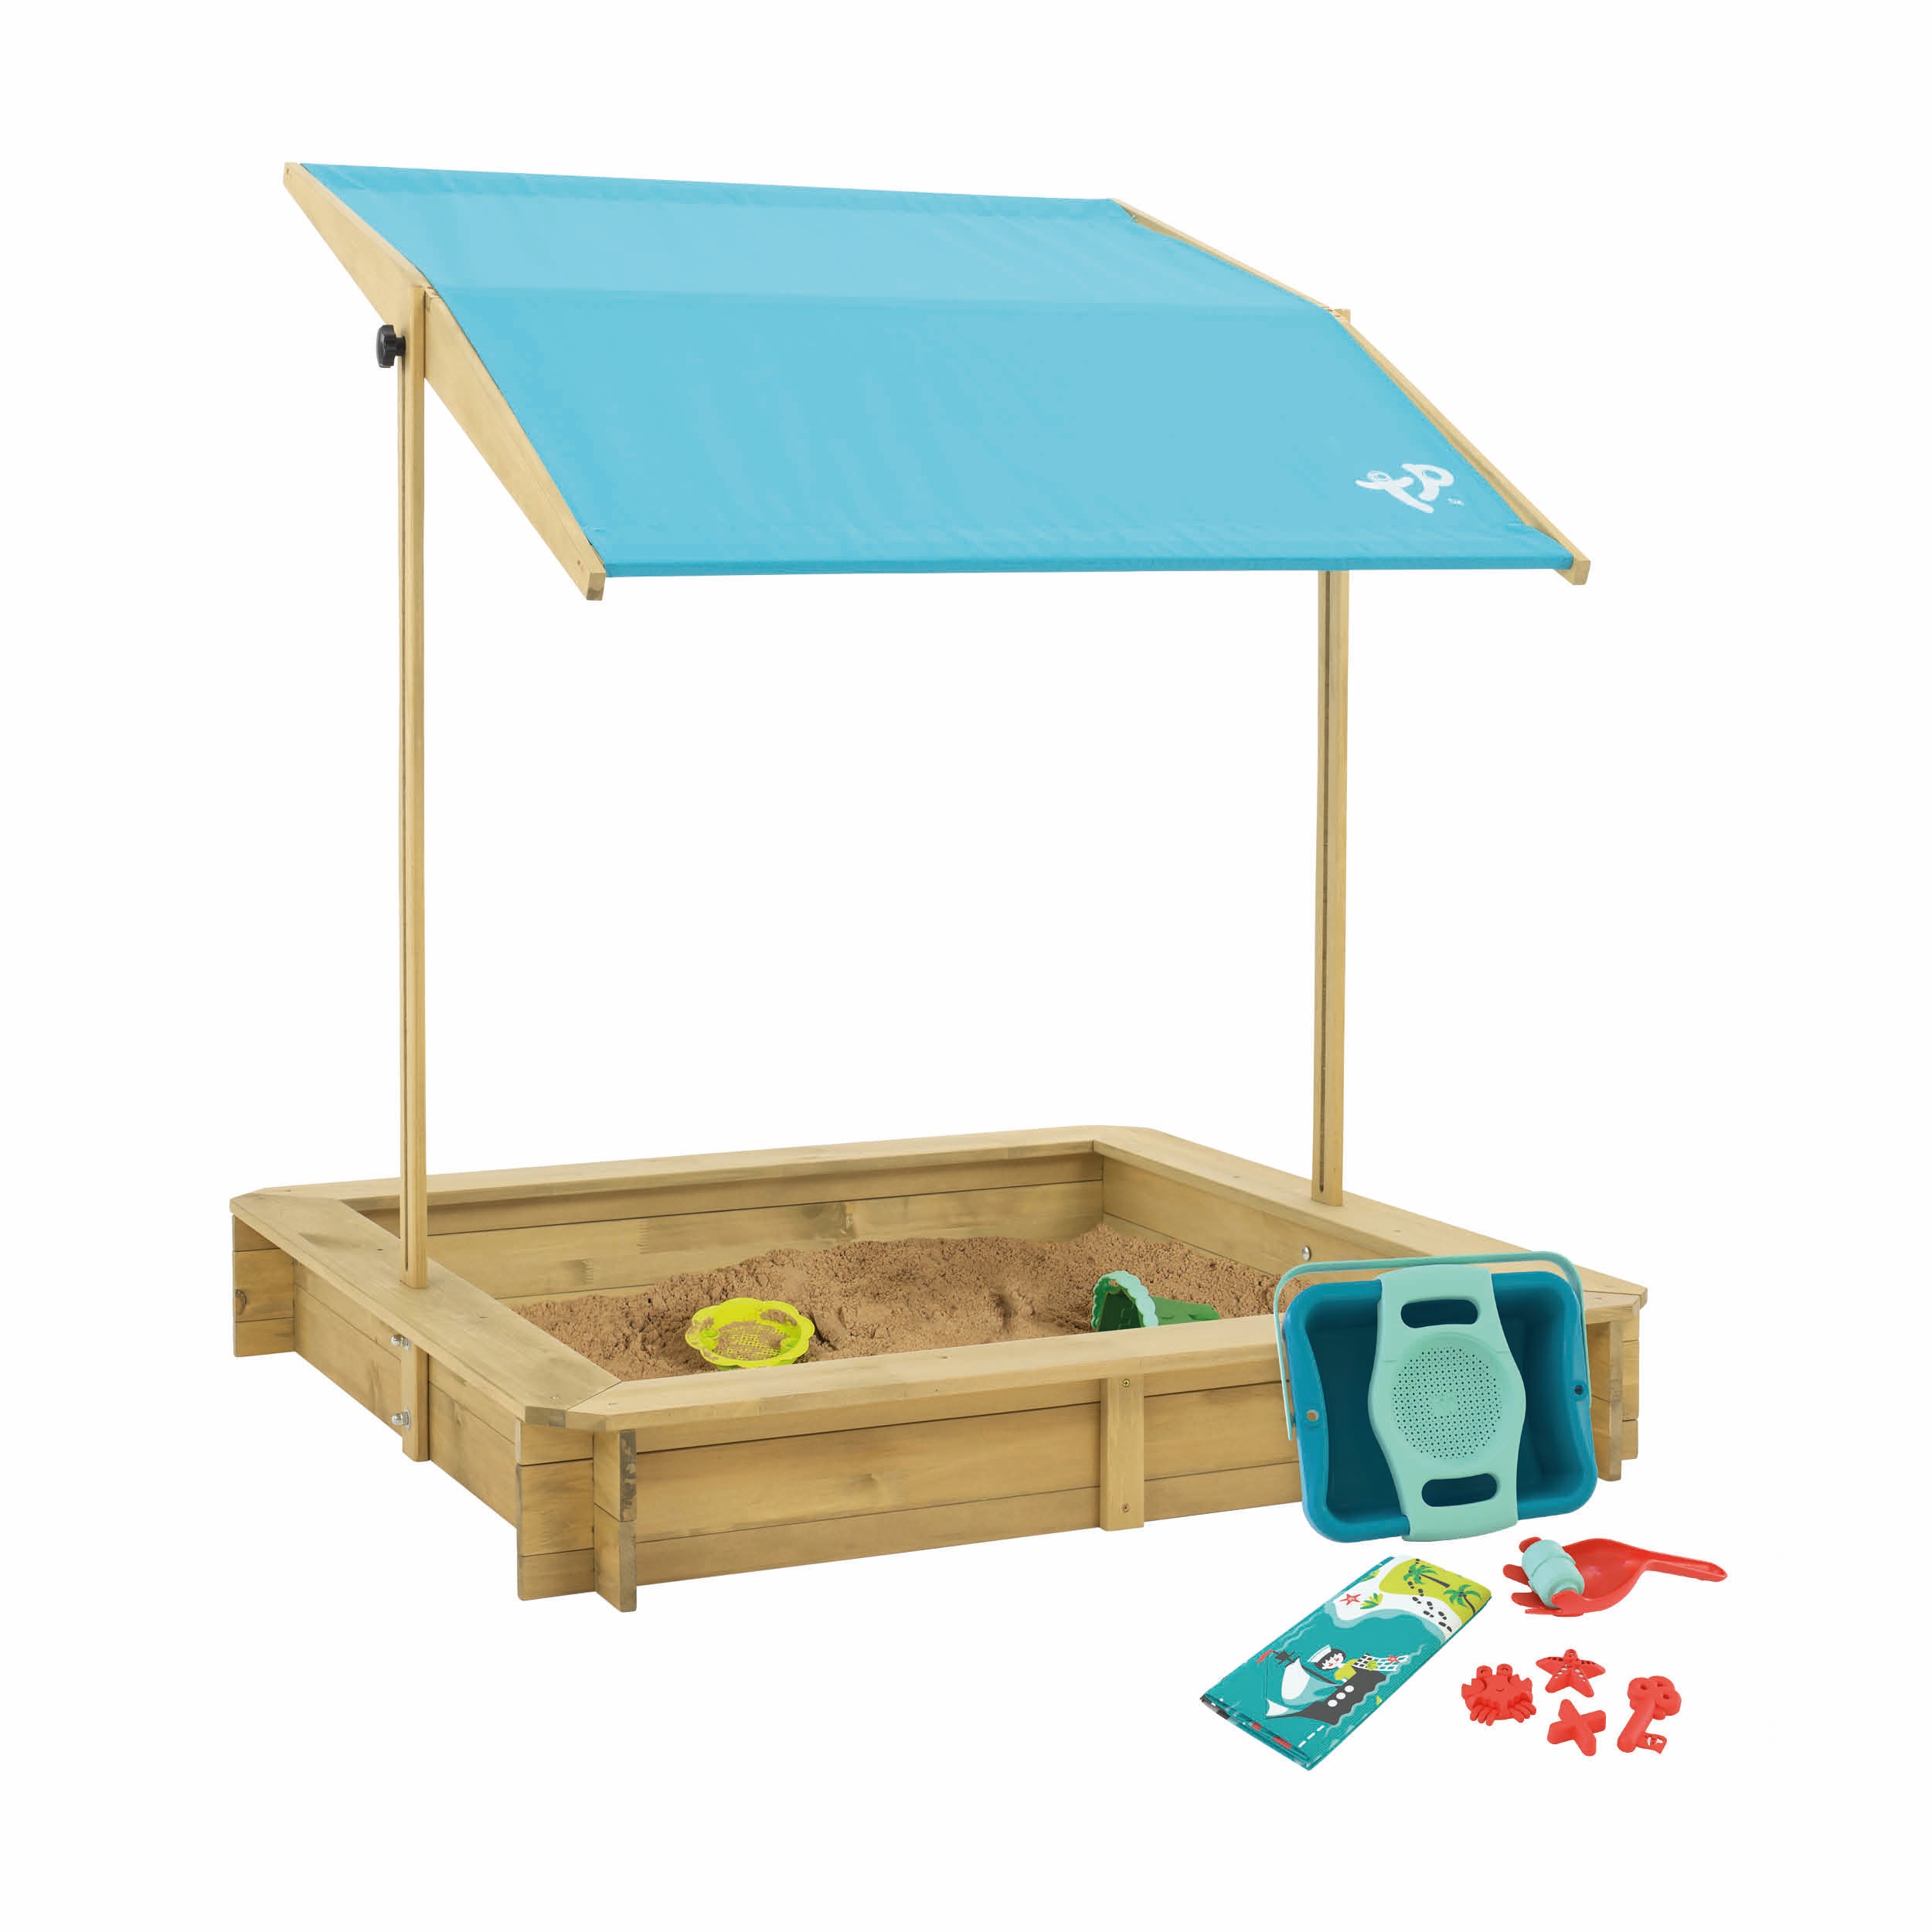 TP Wooden Sandpit with Sun Canopy and Dig & Explore Accessory Kit - FSC<sup>®</sup> certified